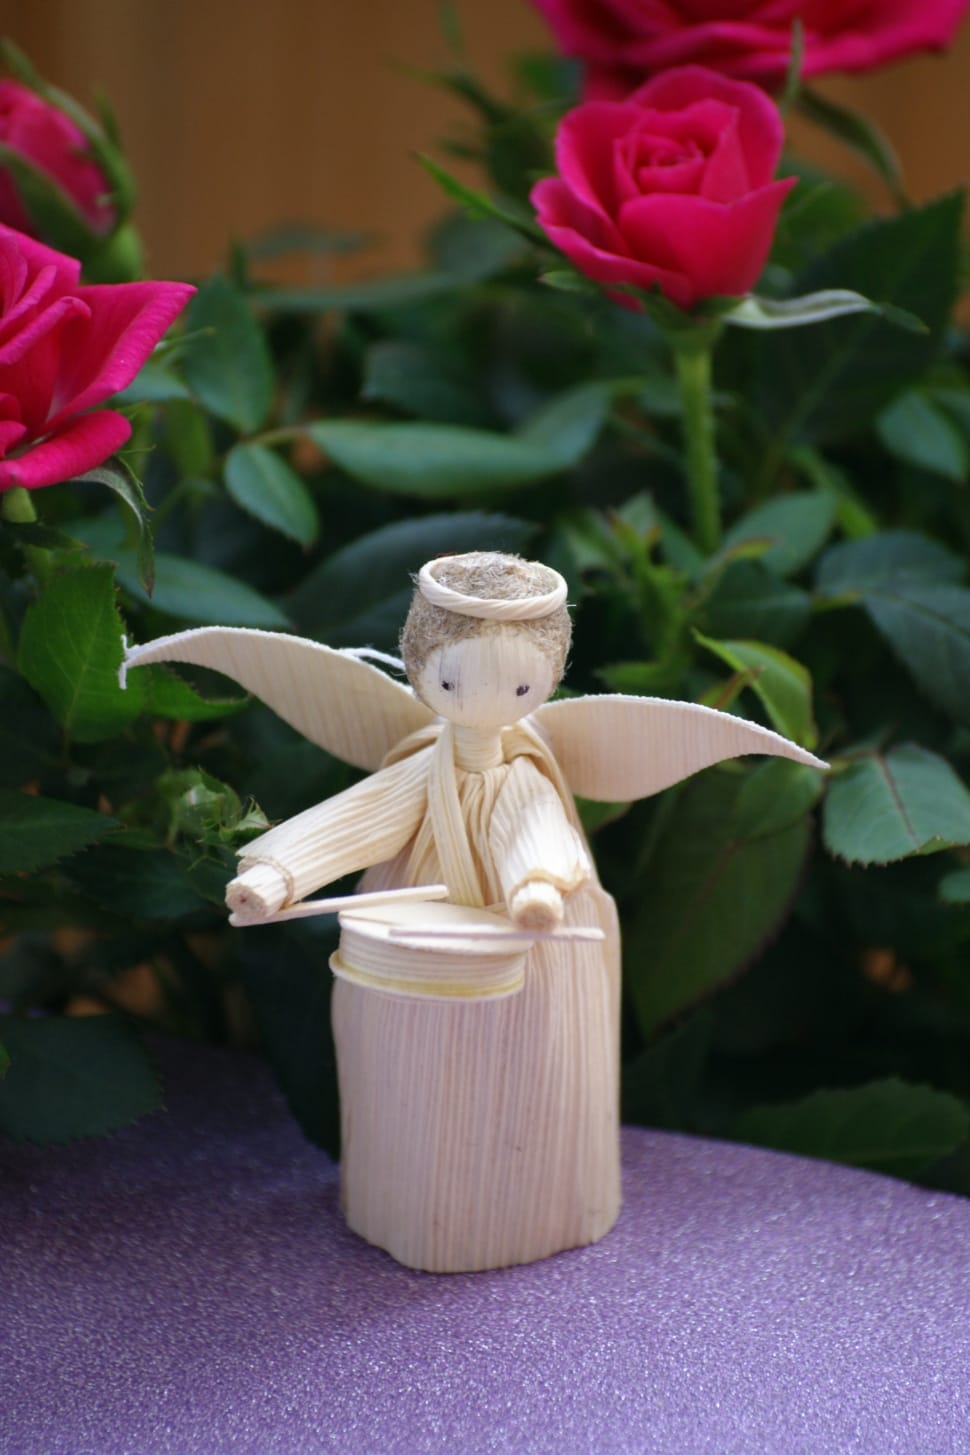 beige angel playing drum stick figurine preview